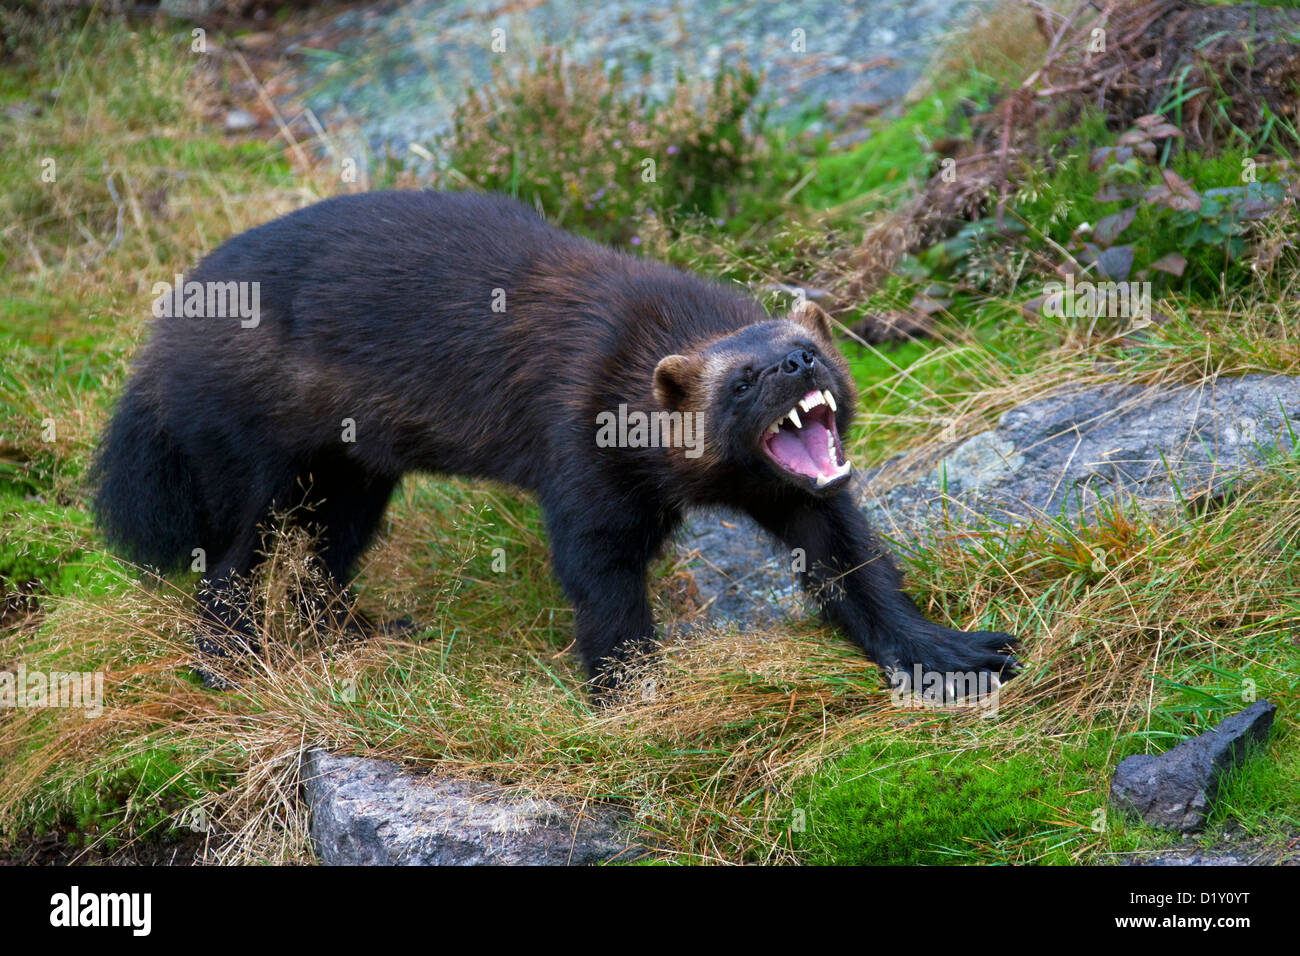 Aggressive Wolverine (Gulo gulo) showing teeth in a menacing threat display on the subarctic tundra in Sweden, Scandinavia Stock Photo